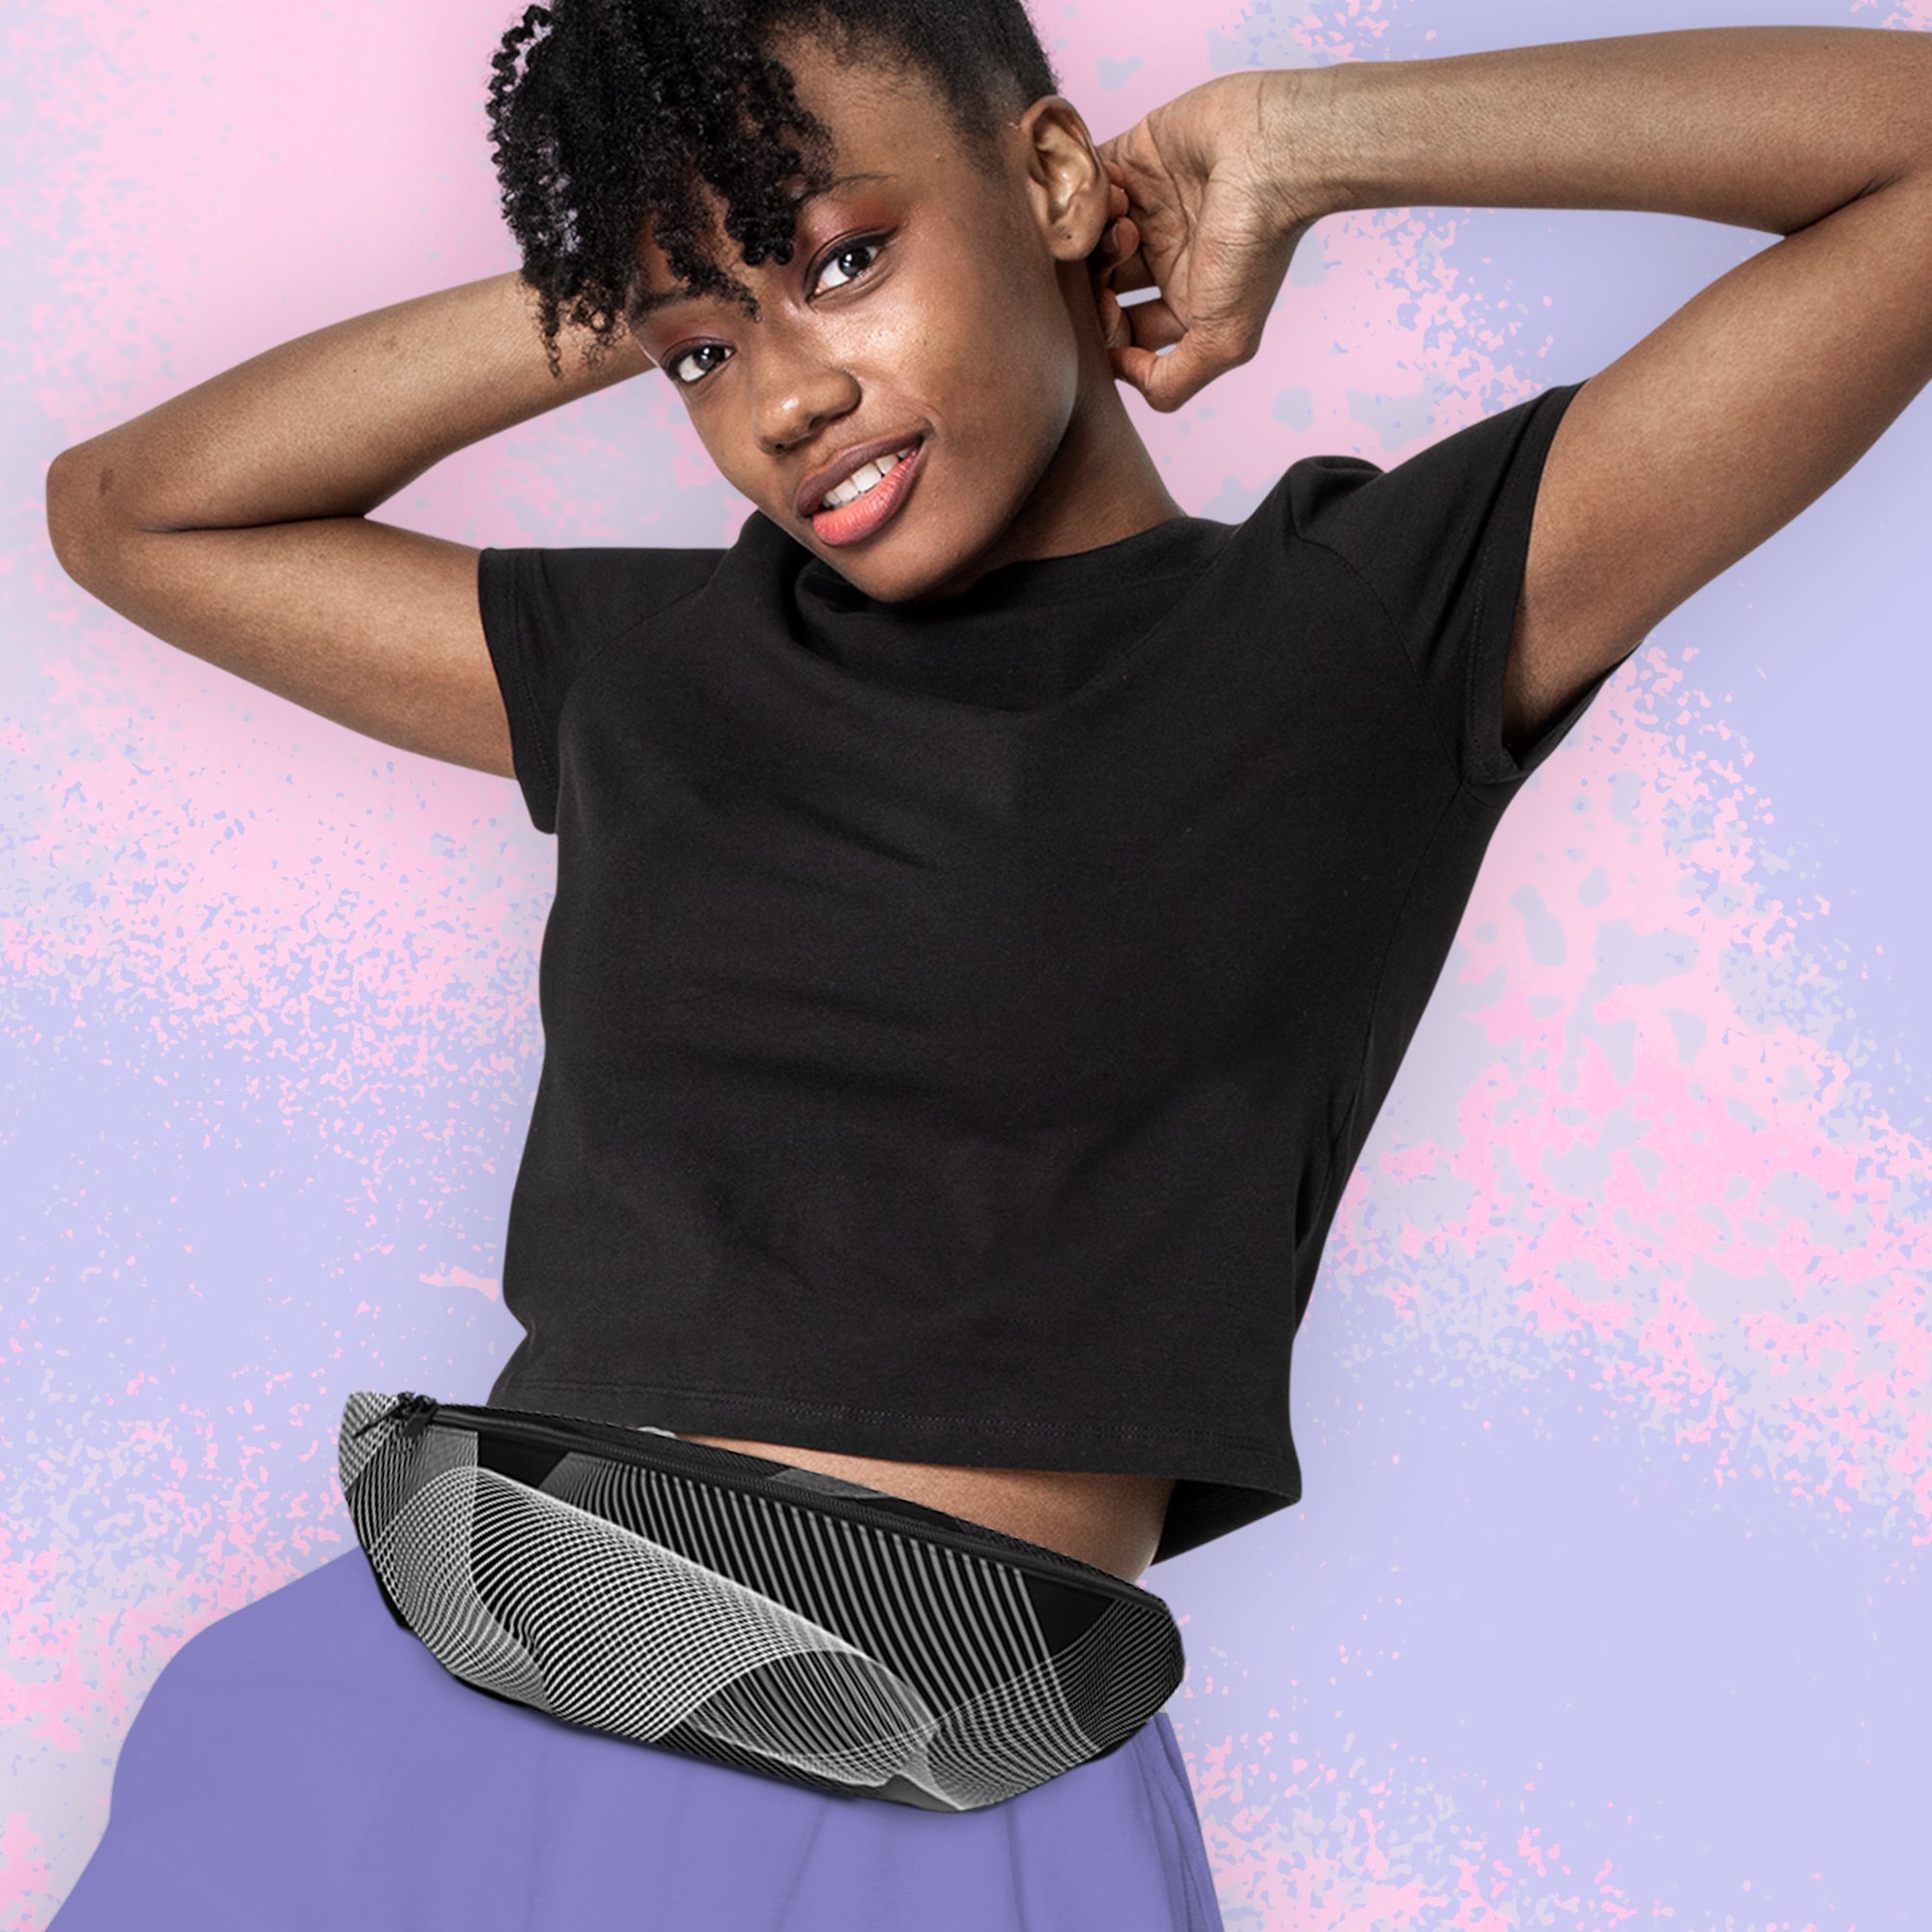 Wave Encounters Fanny Pack